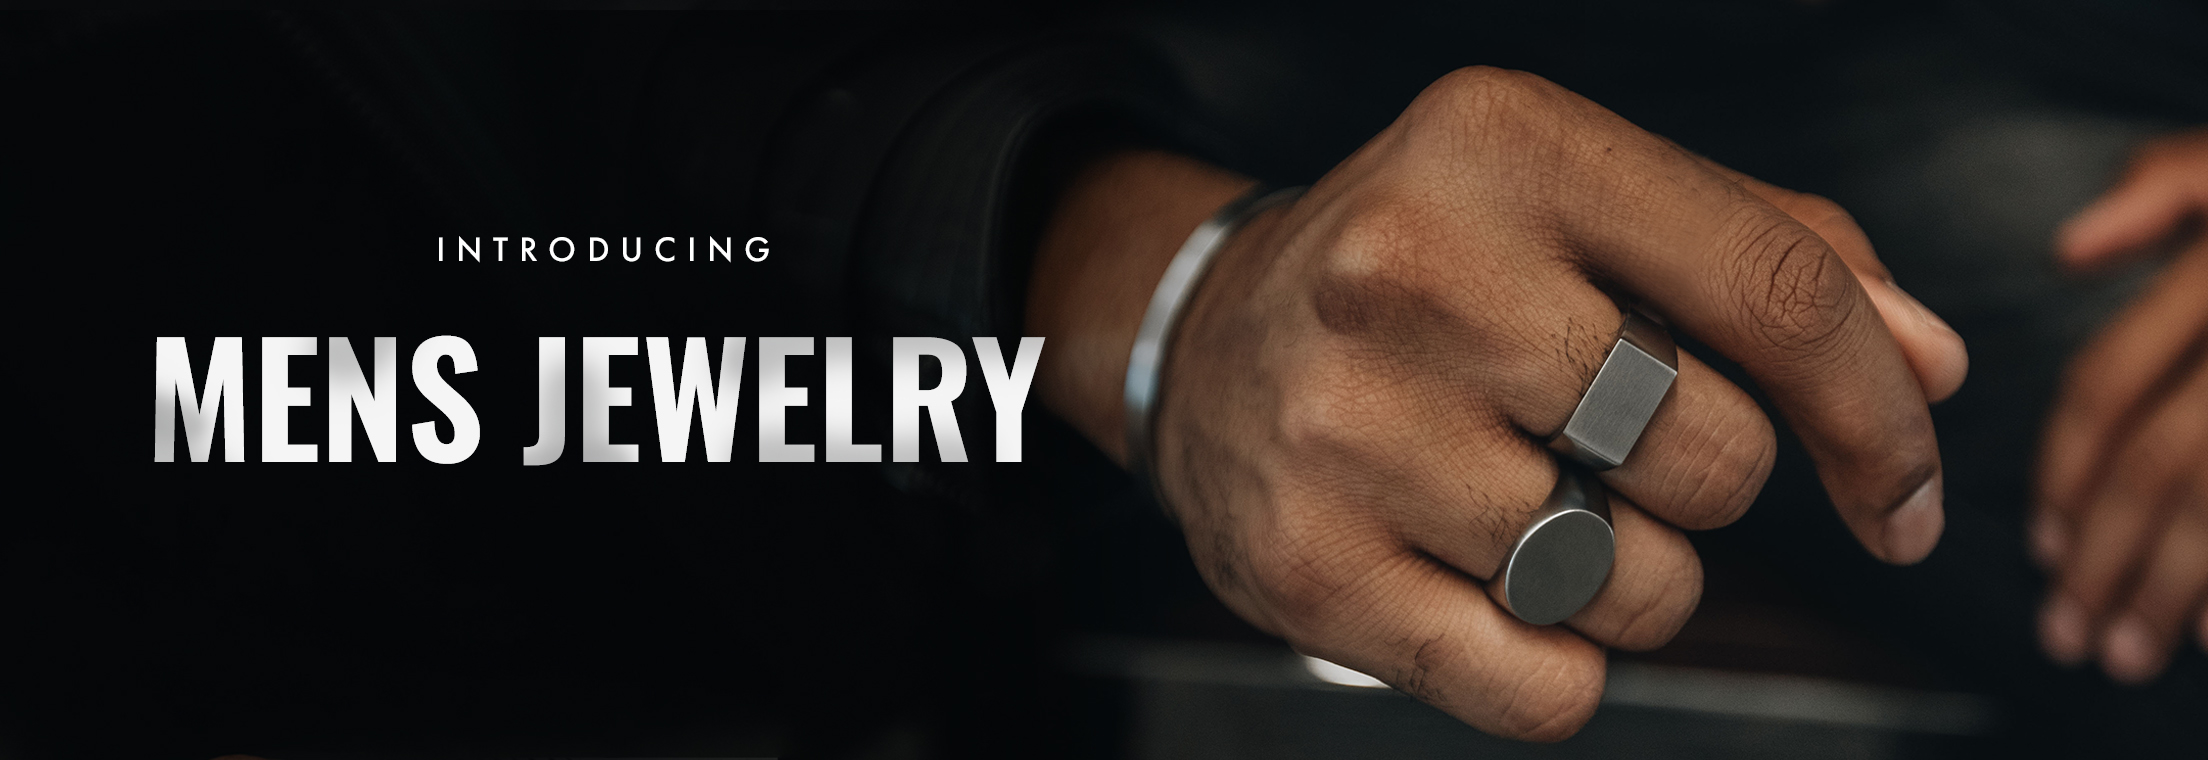 Introducing Mens Jewelry